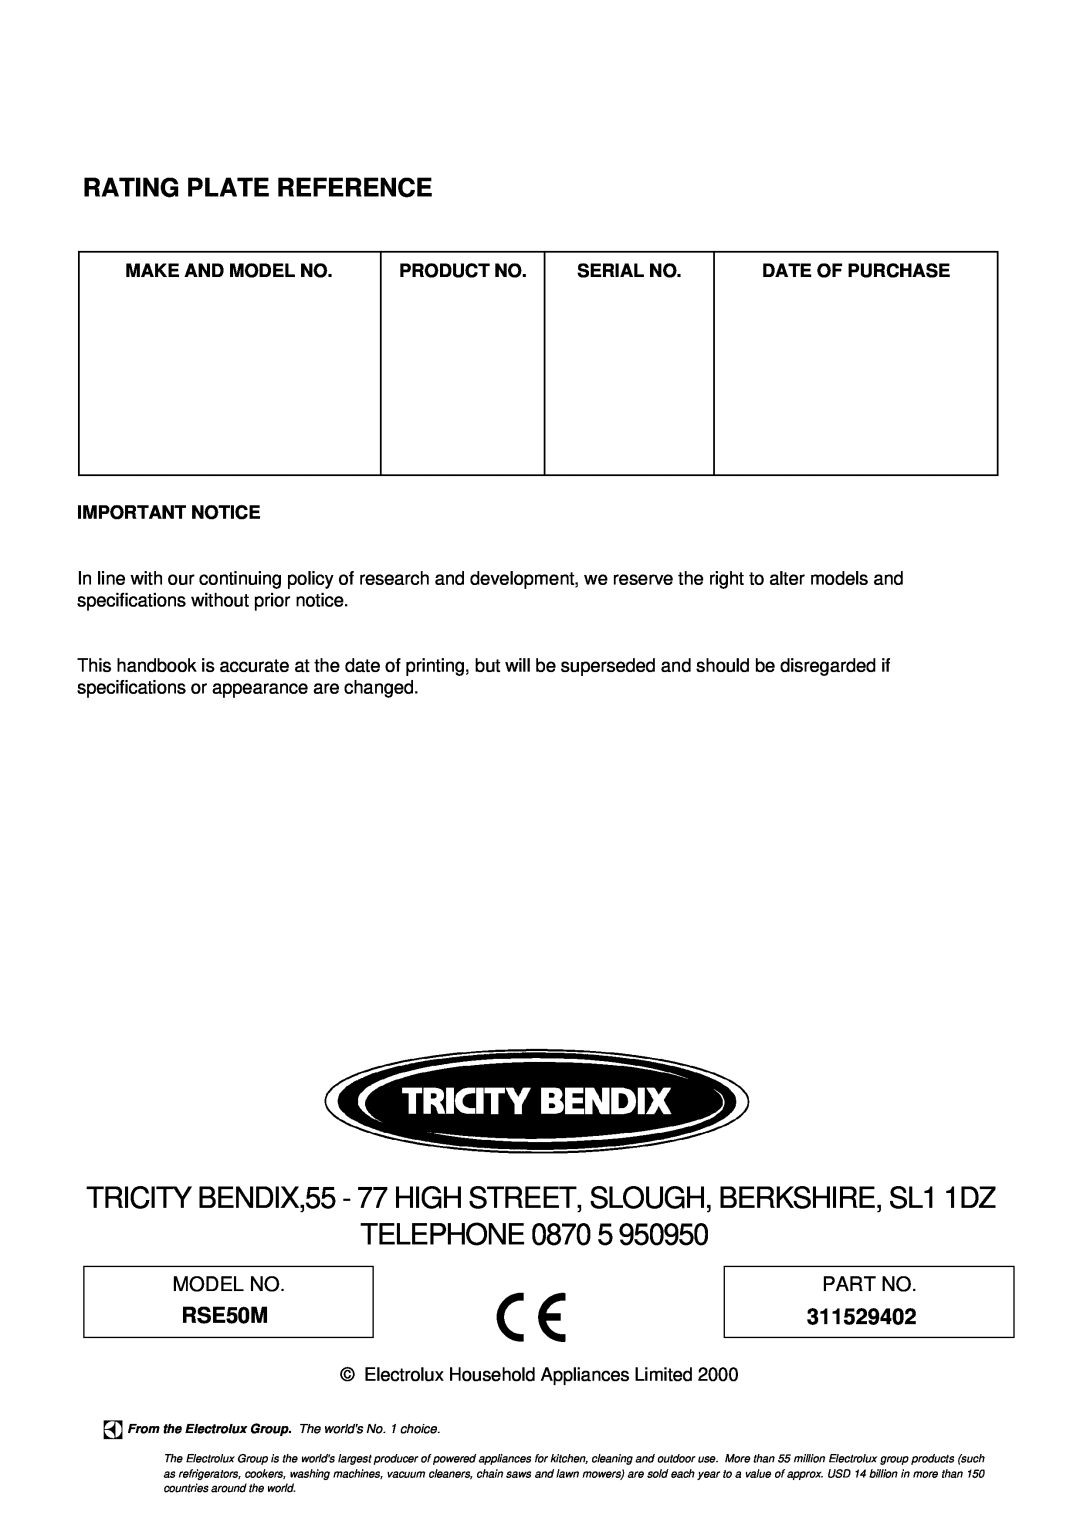 Tricity Bendix RSE50M installation instructions Rating Plate Reference, 311529402, Telephone 